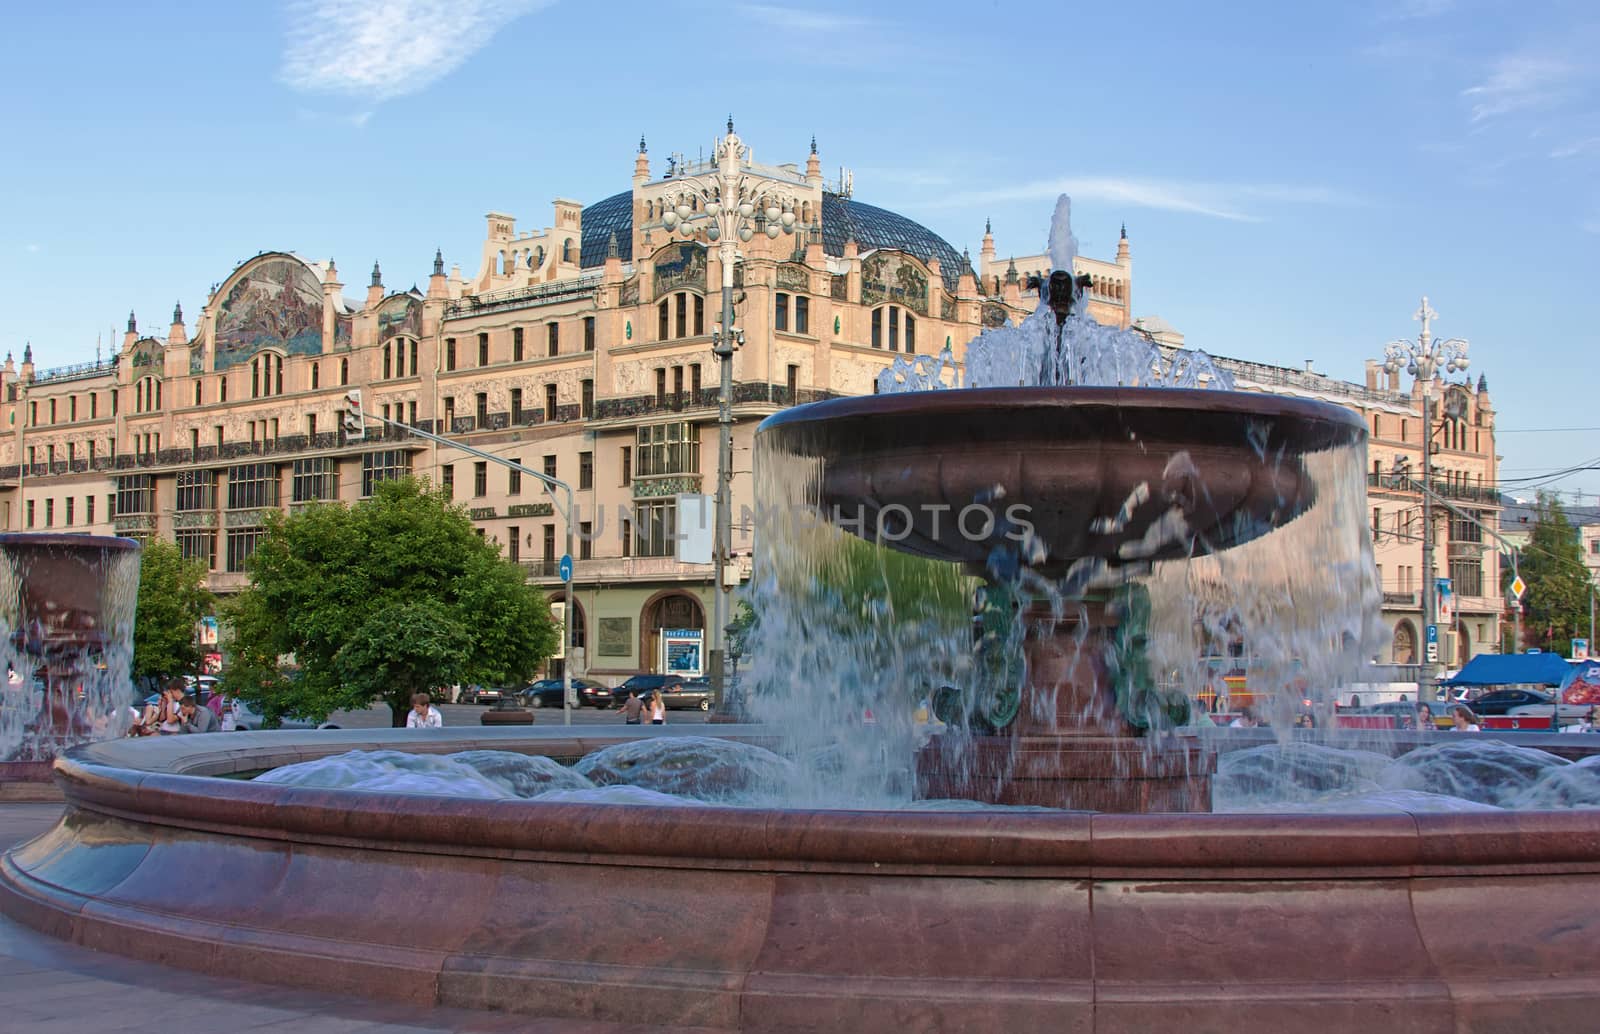 The fountain in front of a Bolshoi Theatre and hotel Mestropol′